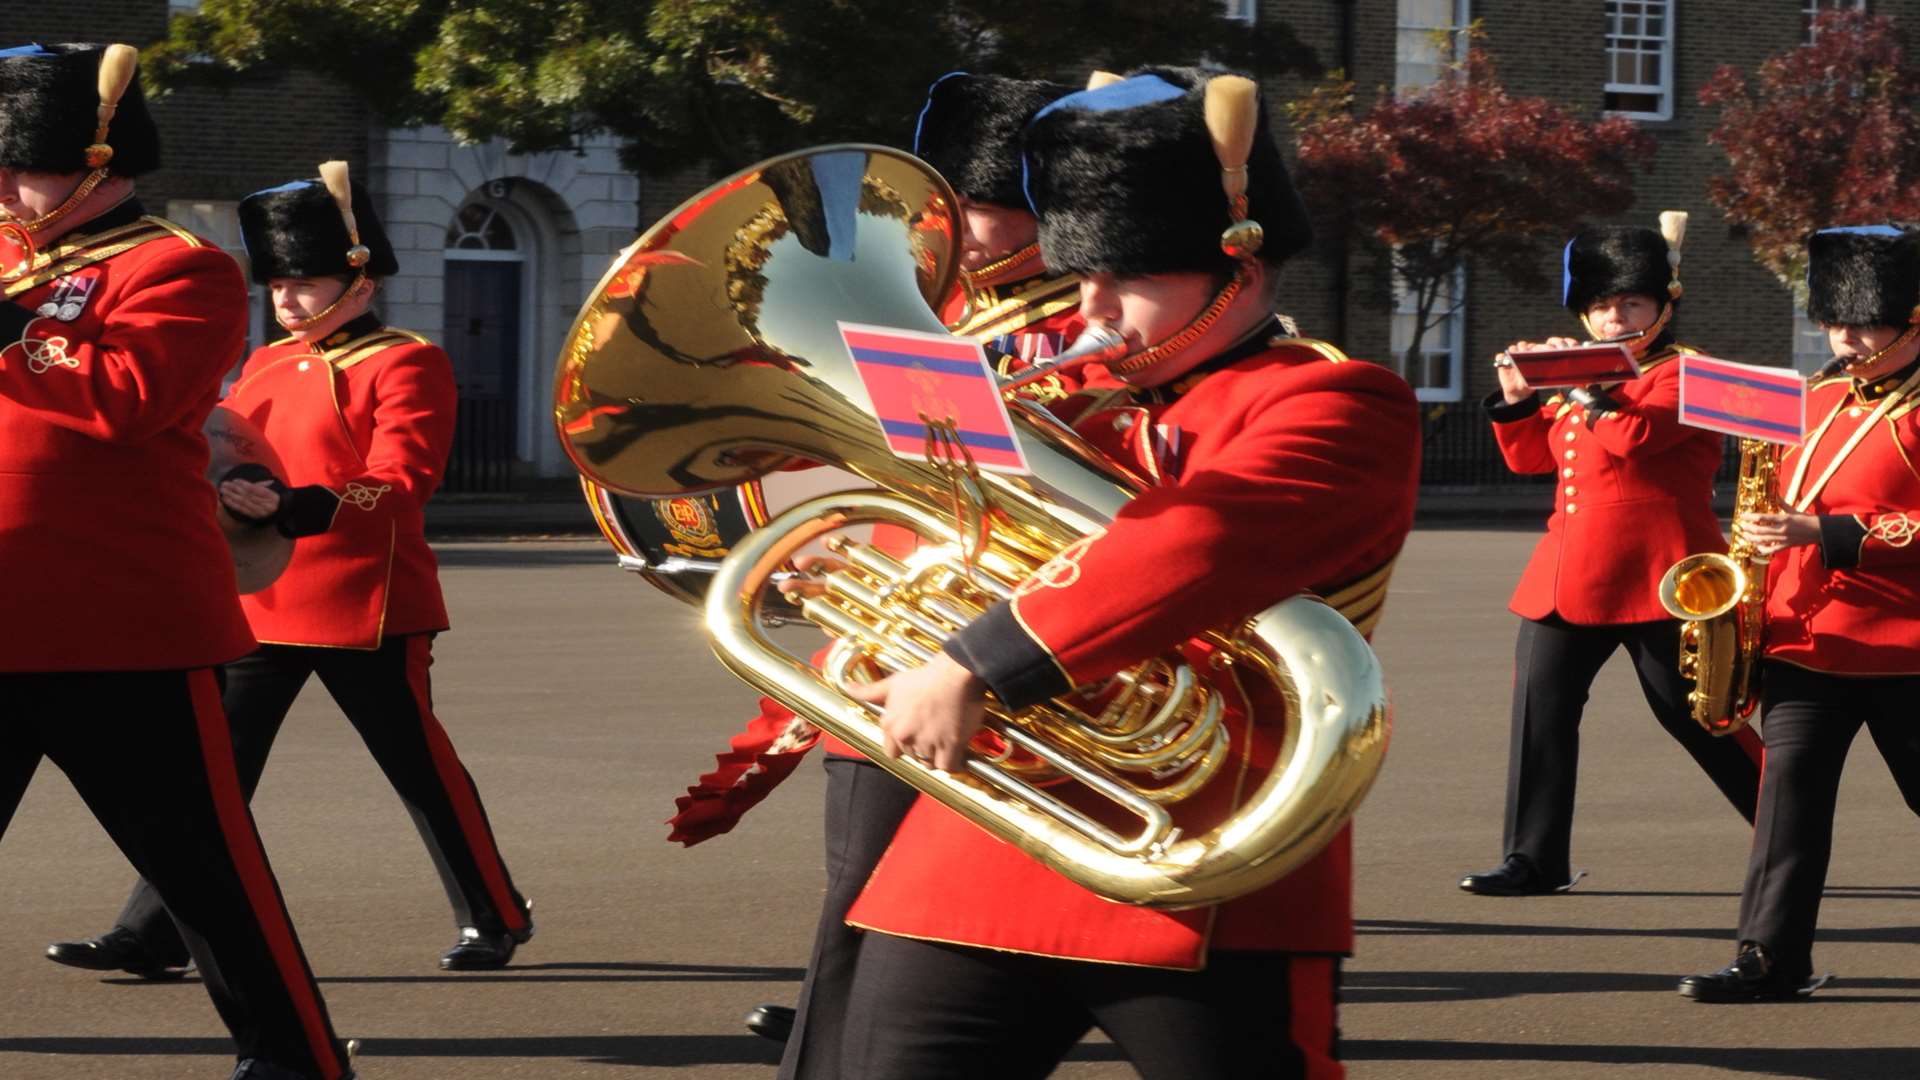 Marching bands are a regular feature on the Brompton parade ground